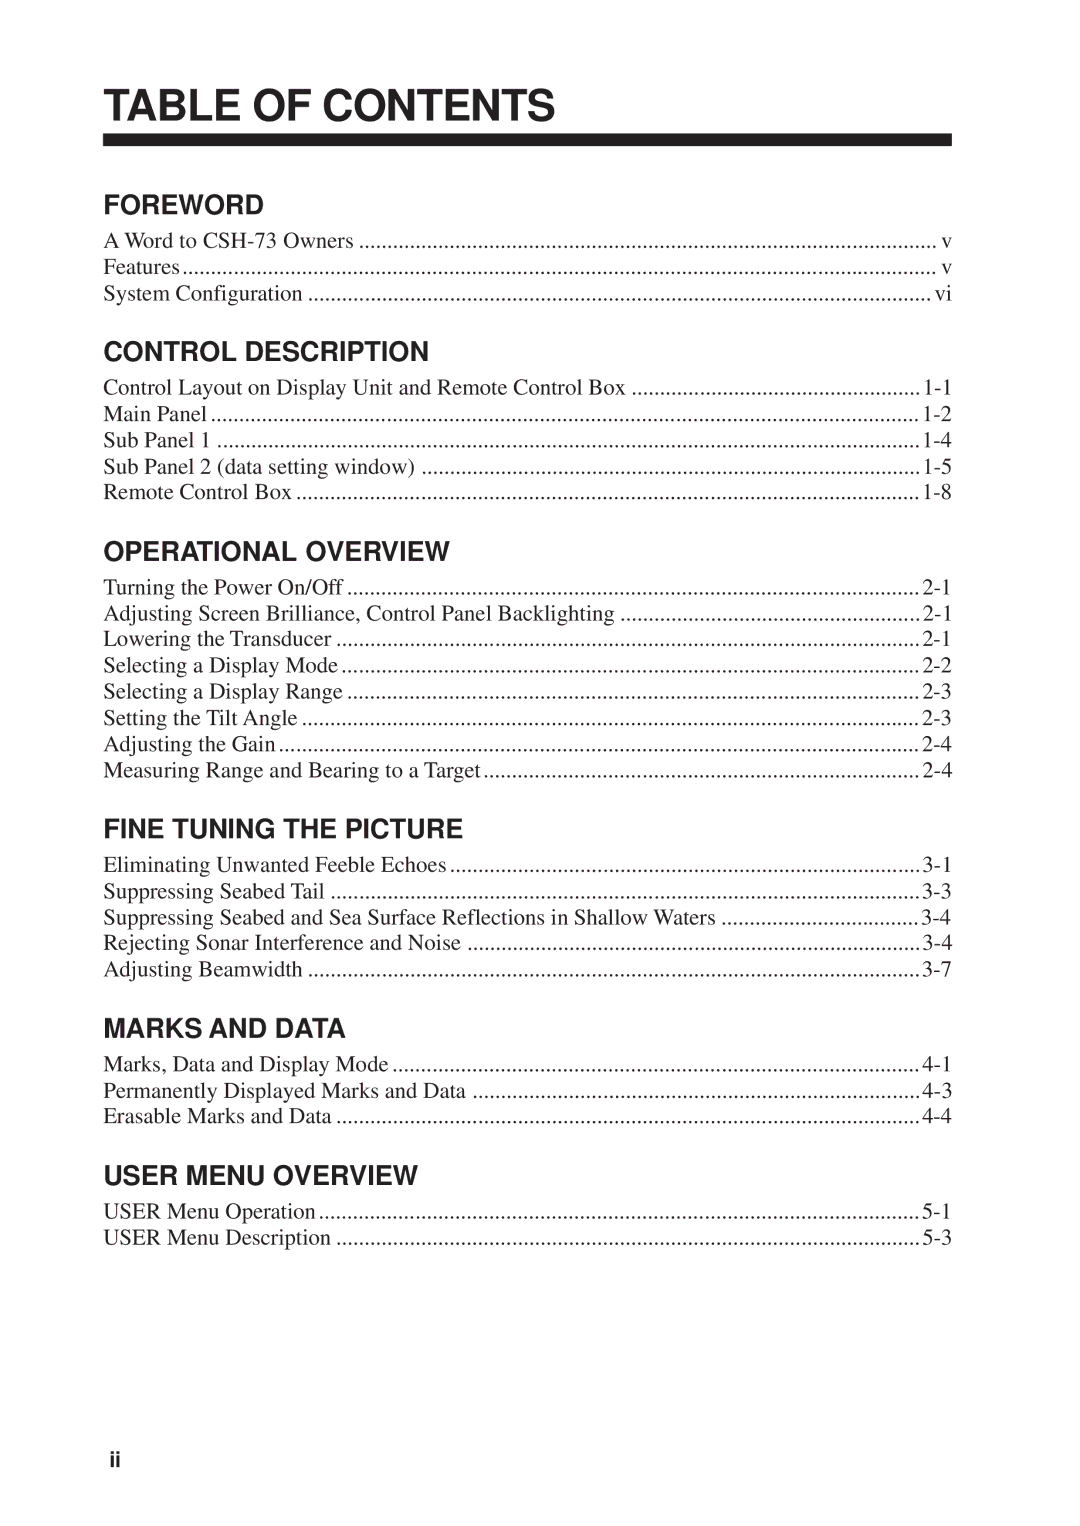 Furuno MODEL CSH-73 manual Table of Contents 